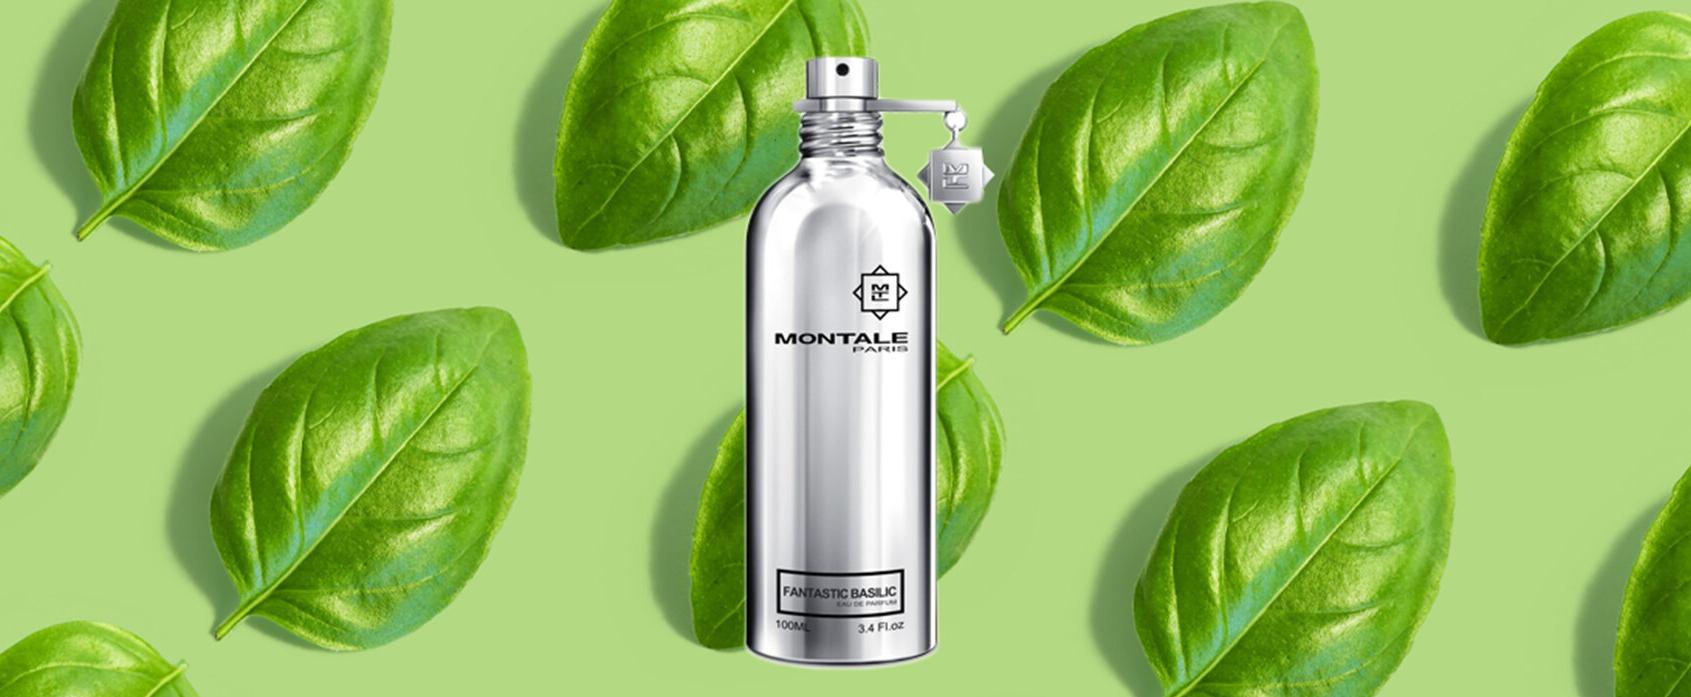 “Fantastic Basilic” – Montale Launches New Fragrance With Basil